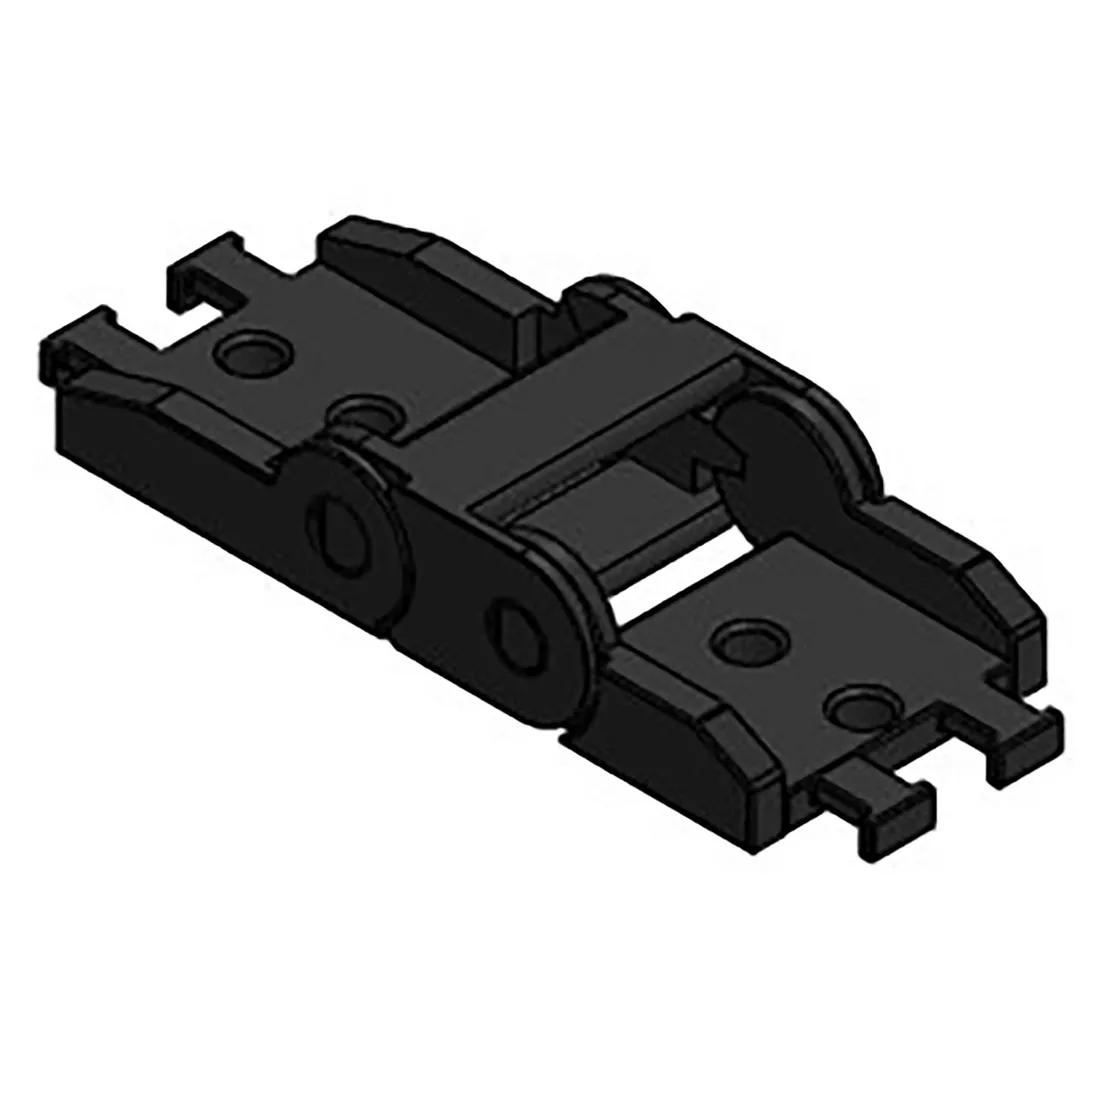 Cable Chain - End Bracket